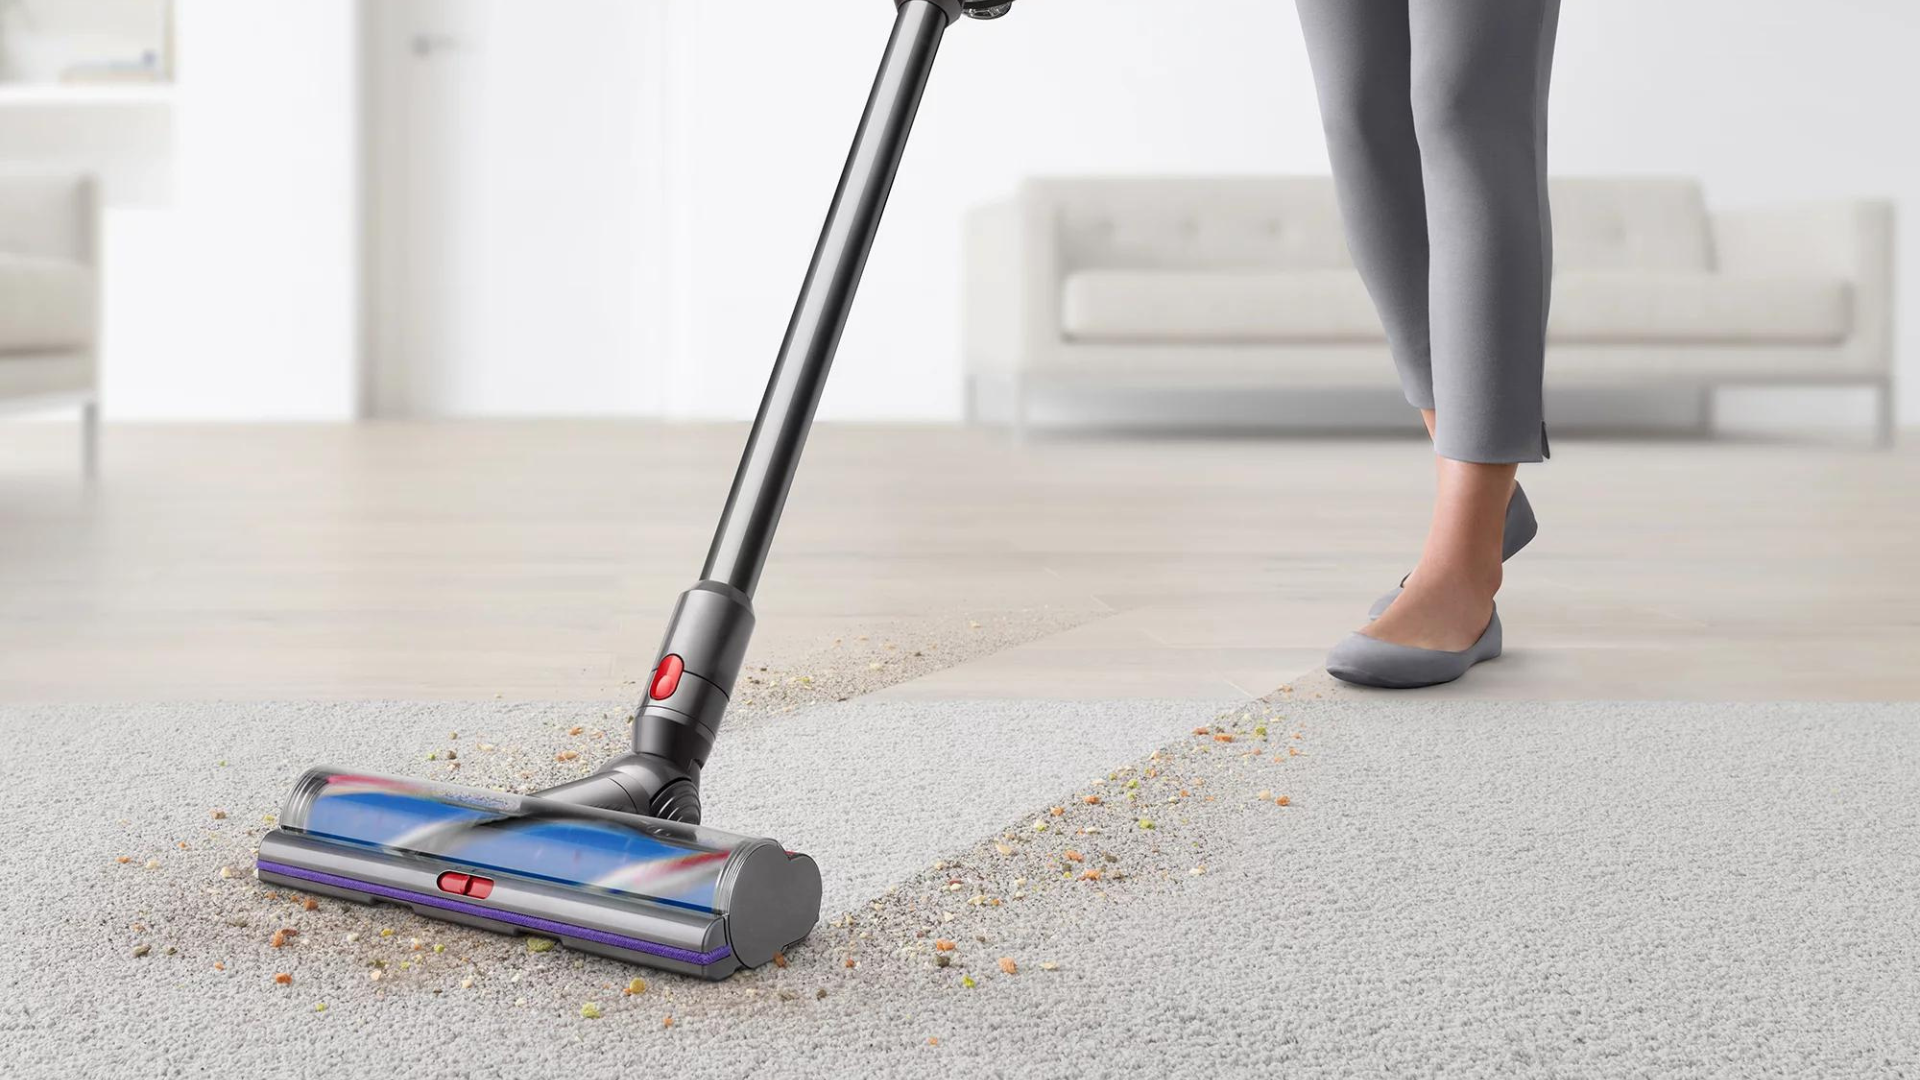 A person using the Dyson V11 on carpet